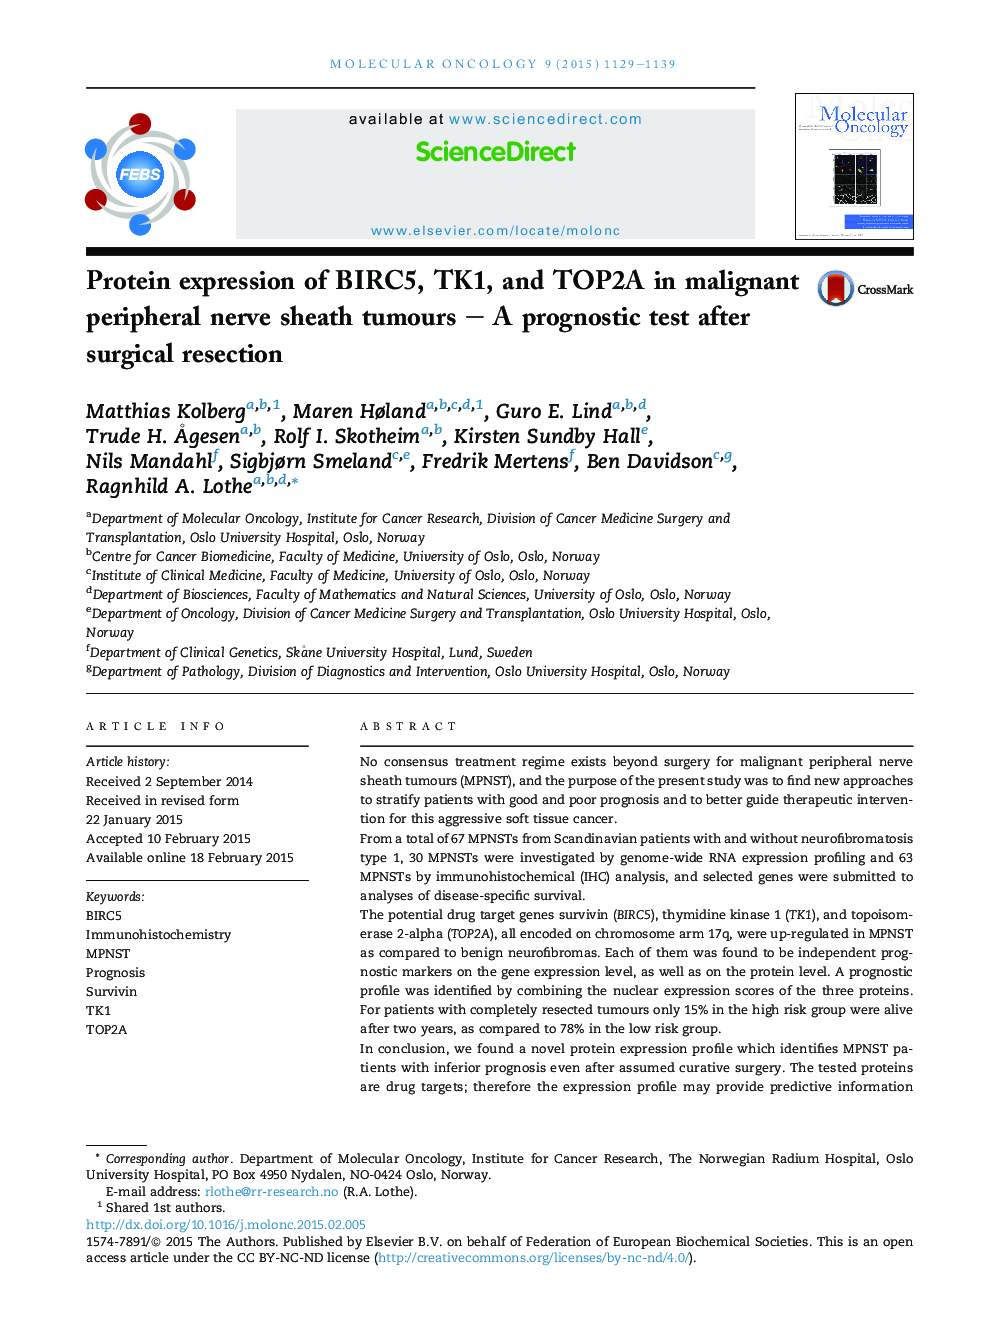 Protein expression of BIRC5, TK1, and TOP2A in malignant peripheral nerve sheath tumours - A prognostic test after surgical resection